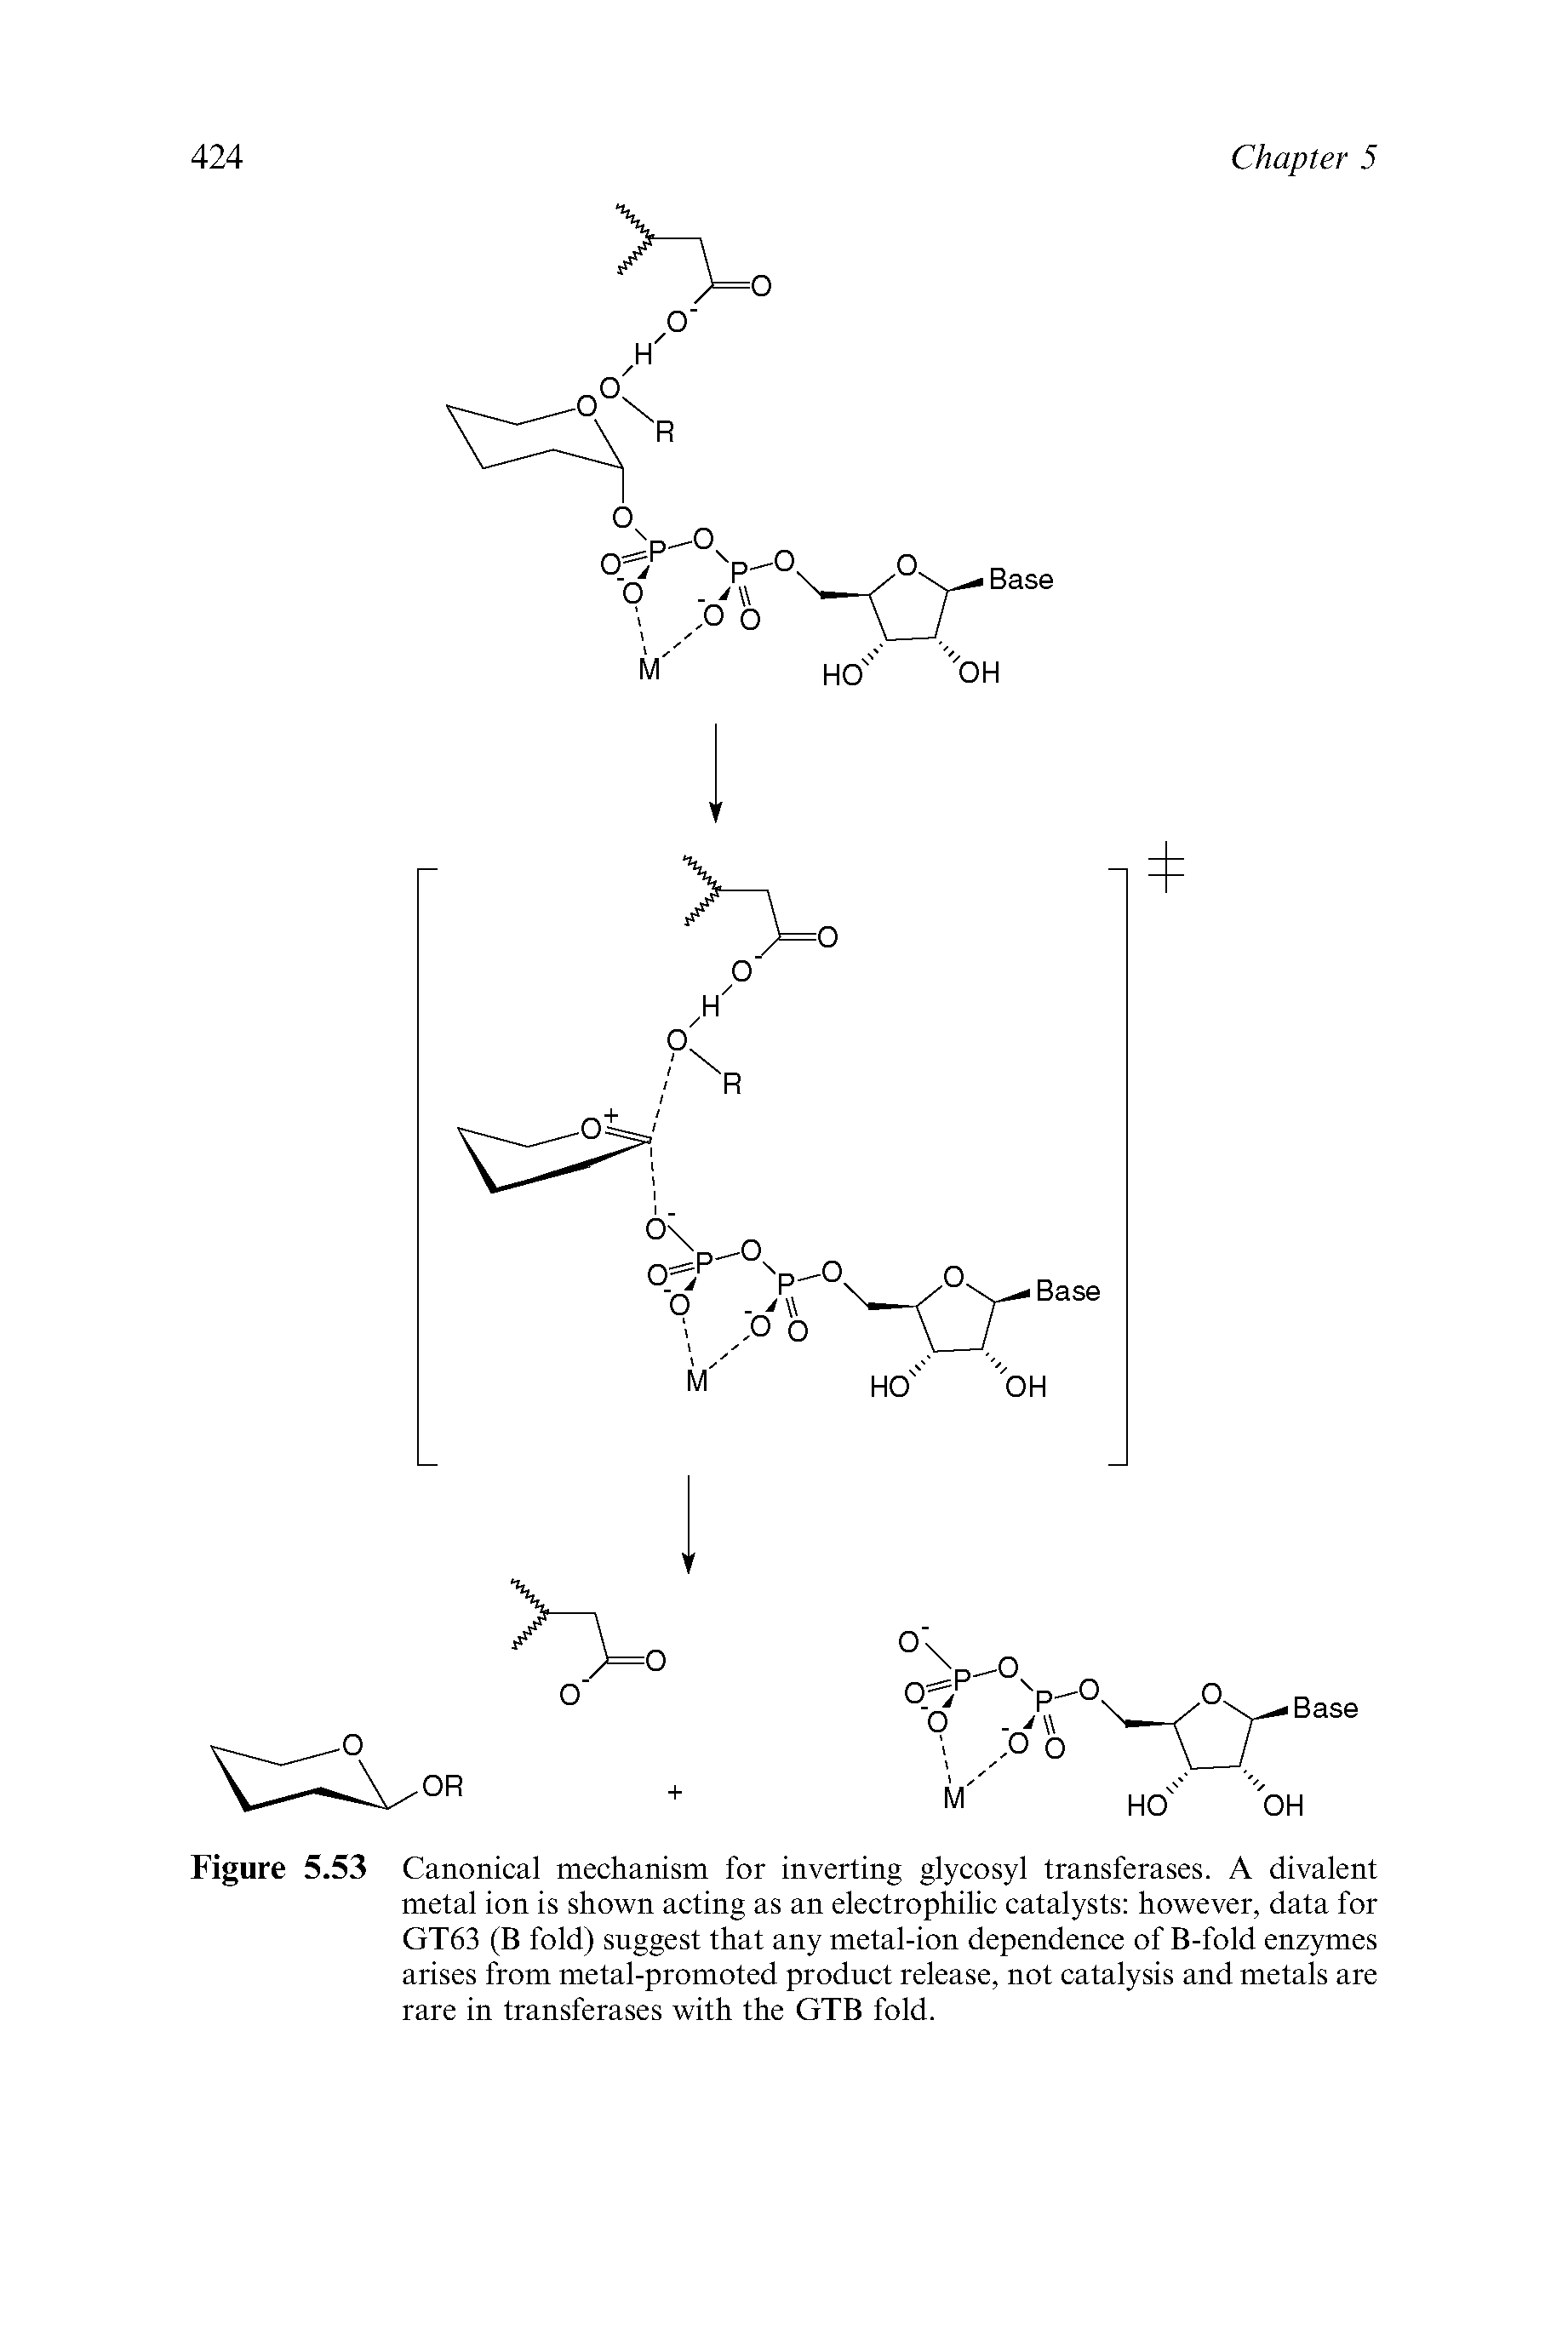 Figure 5.53 Canonical mechanism for inverting glycosyl transferases. A divalent metal ion is shown acting as an electrophilic catalysts however, data for GT63 (B fold) suggest that any metal-ion dependence of B-fold enzymes arises from metal-promoted product release, not catalysis and metals are rare in transferases with the GTB fold.